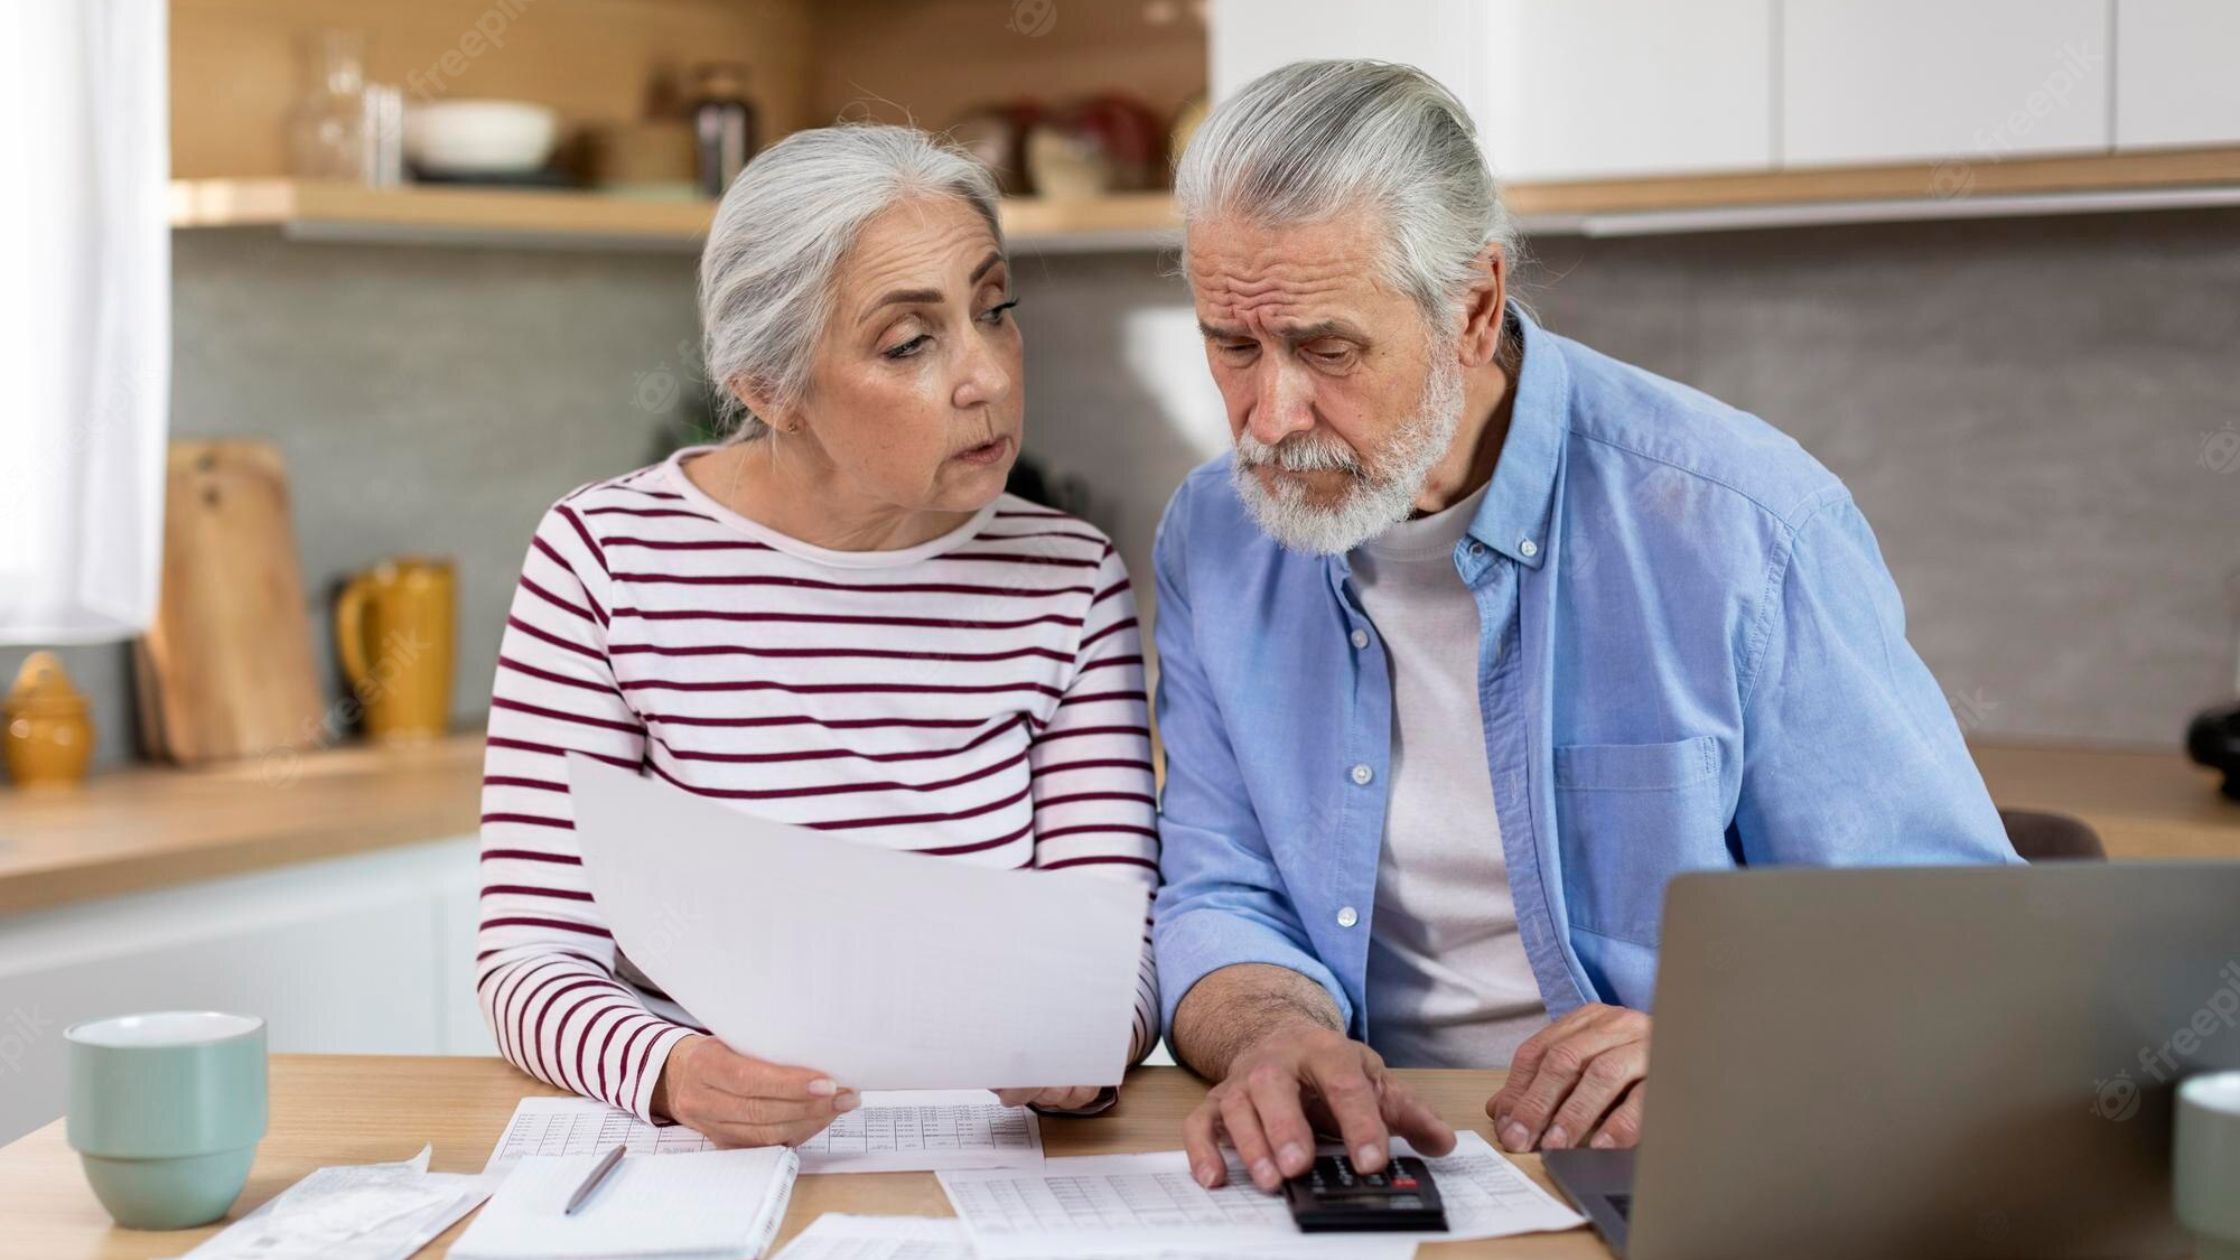 Senior couple going over their finances in front of a computer stock image